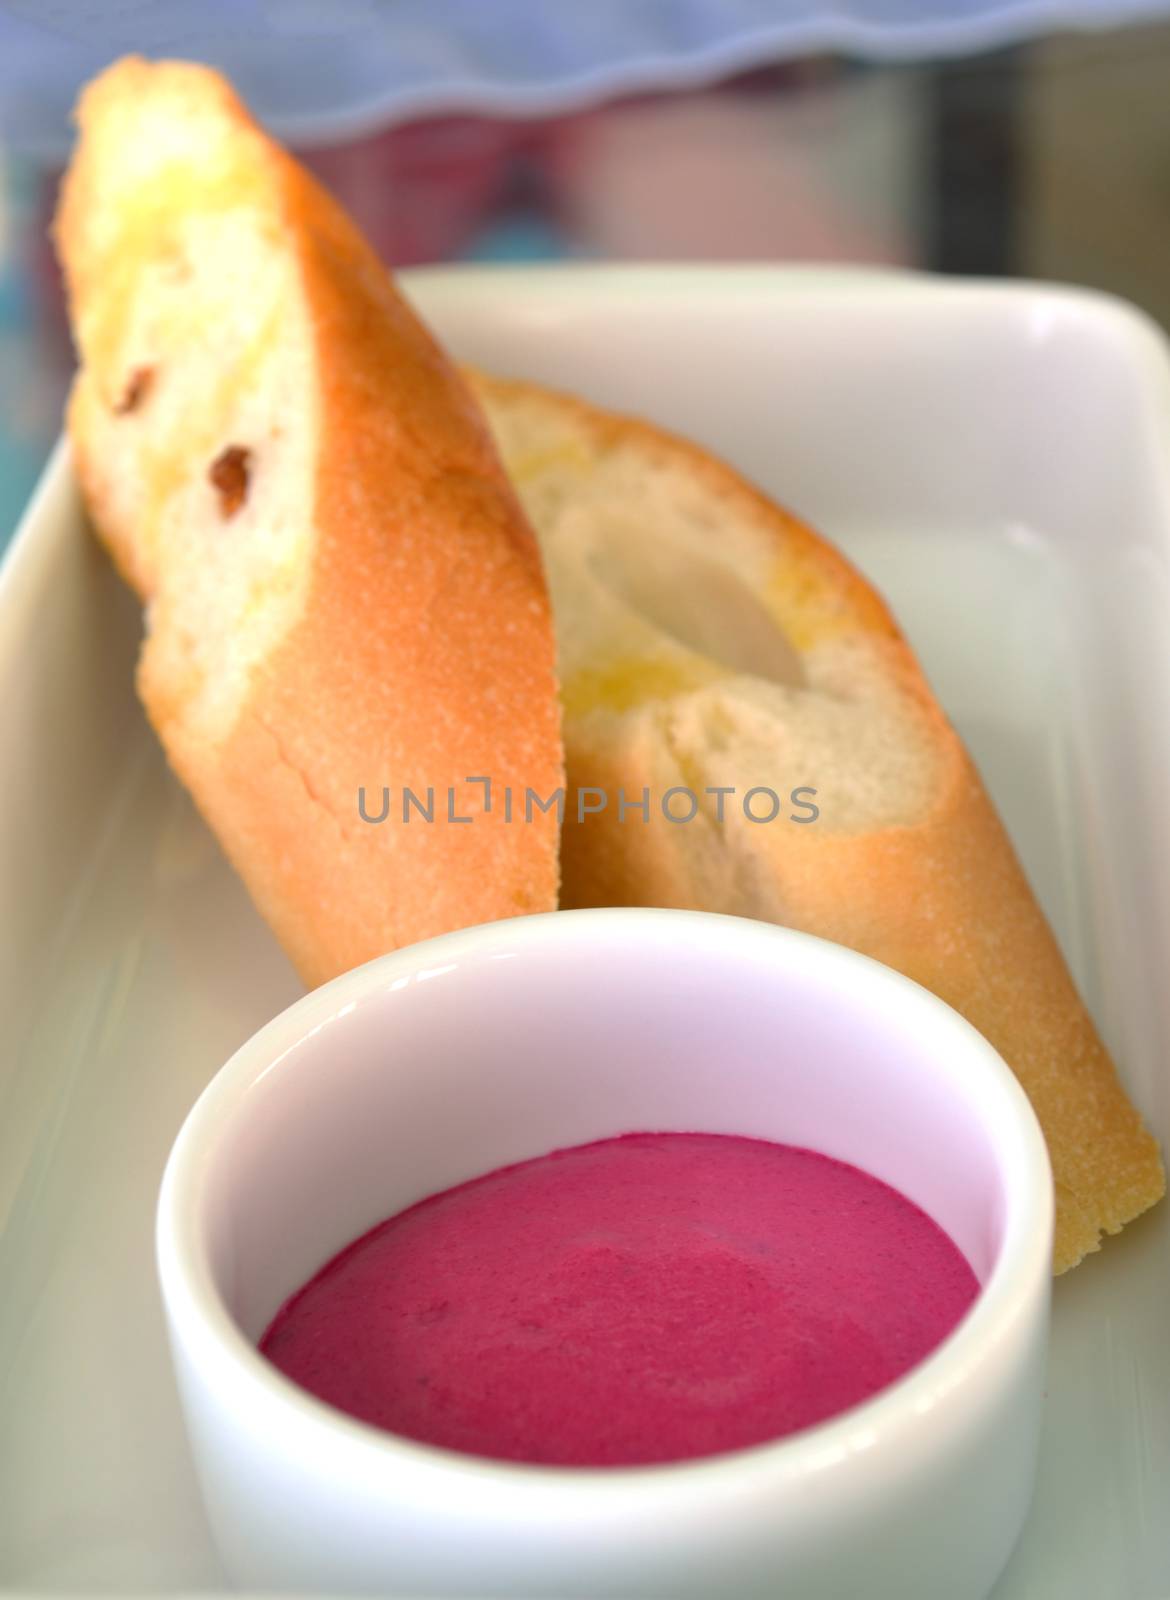 homemade pink jam with bread; breakfast meal